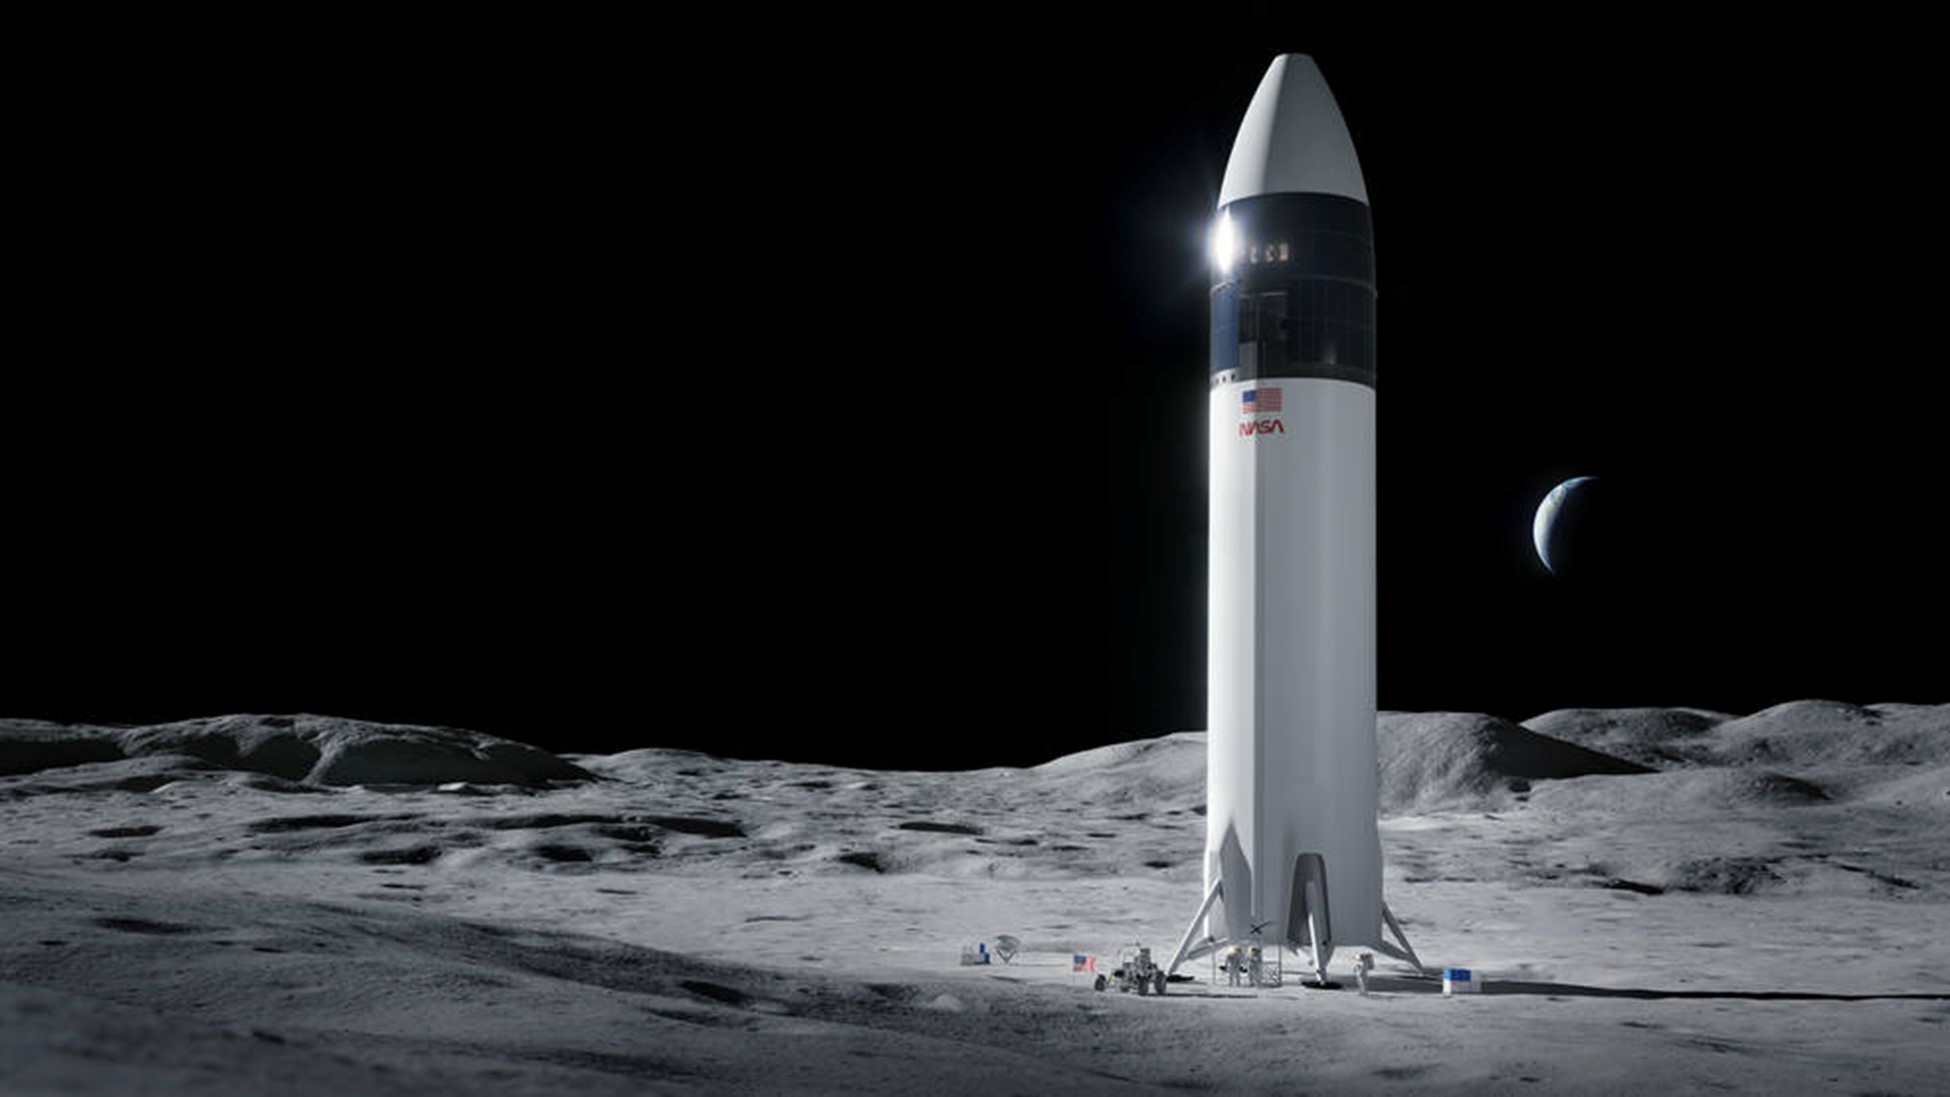 Illustration of SpaceX Starship human lander design that will carry the first NASA astronauts to the surface of the Moon under the Artemis program. Credits: SpaceX